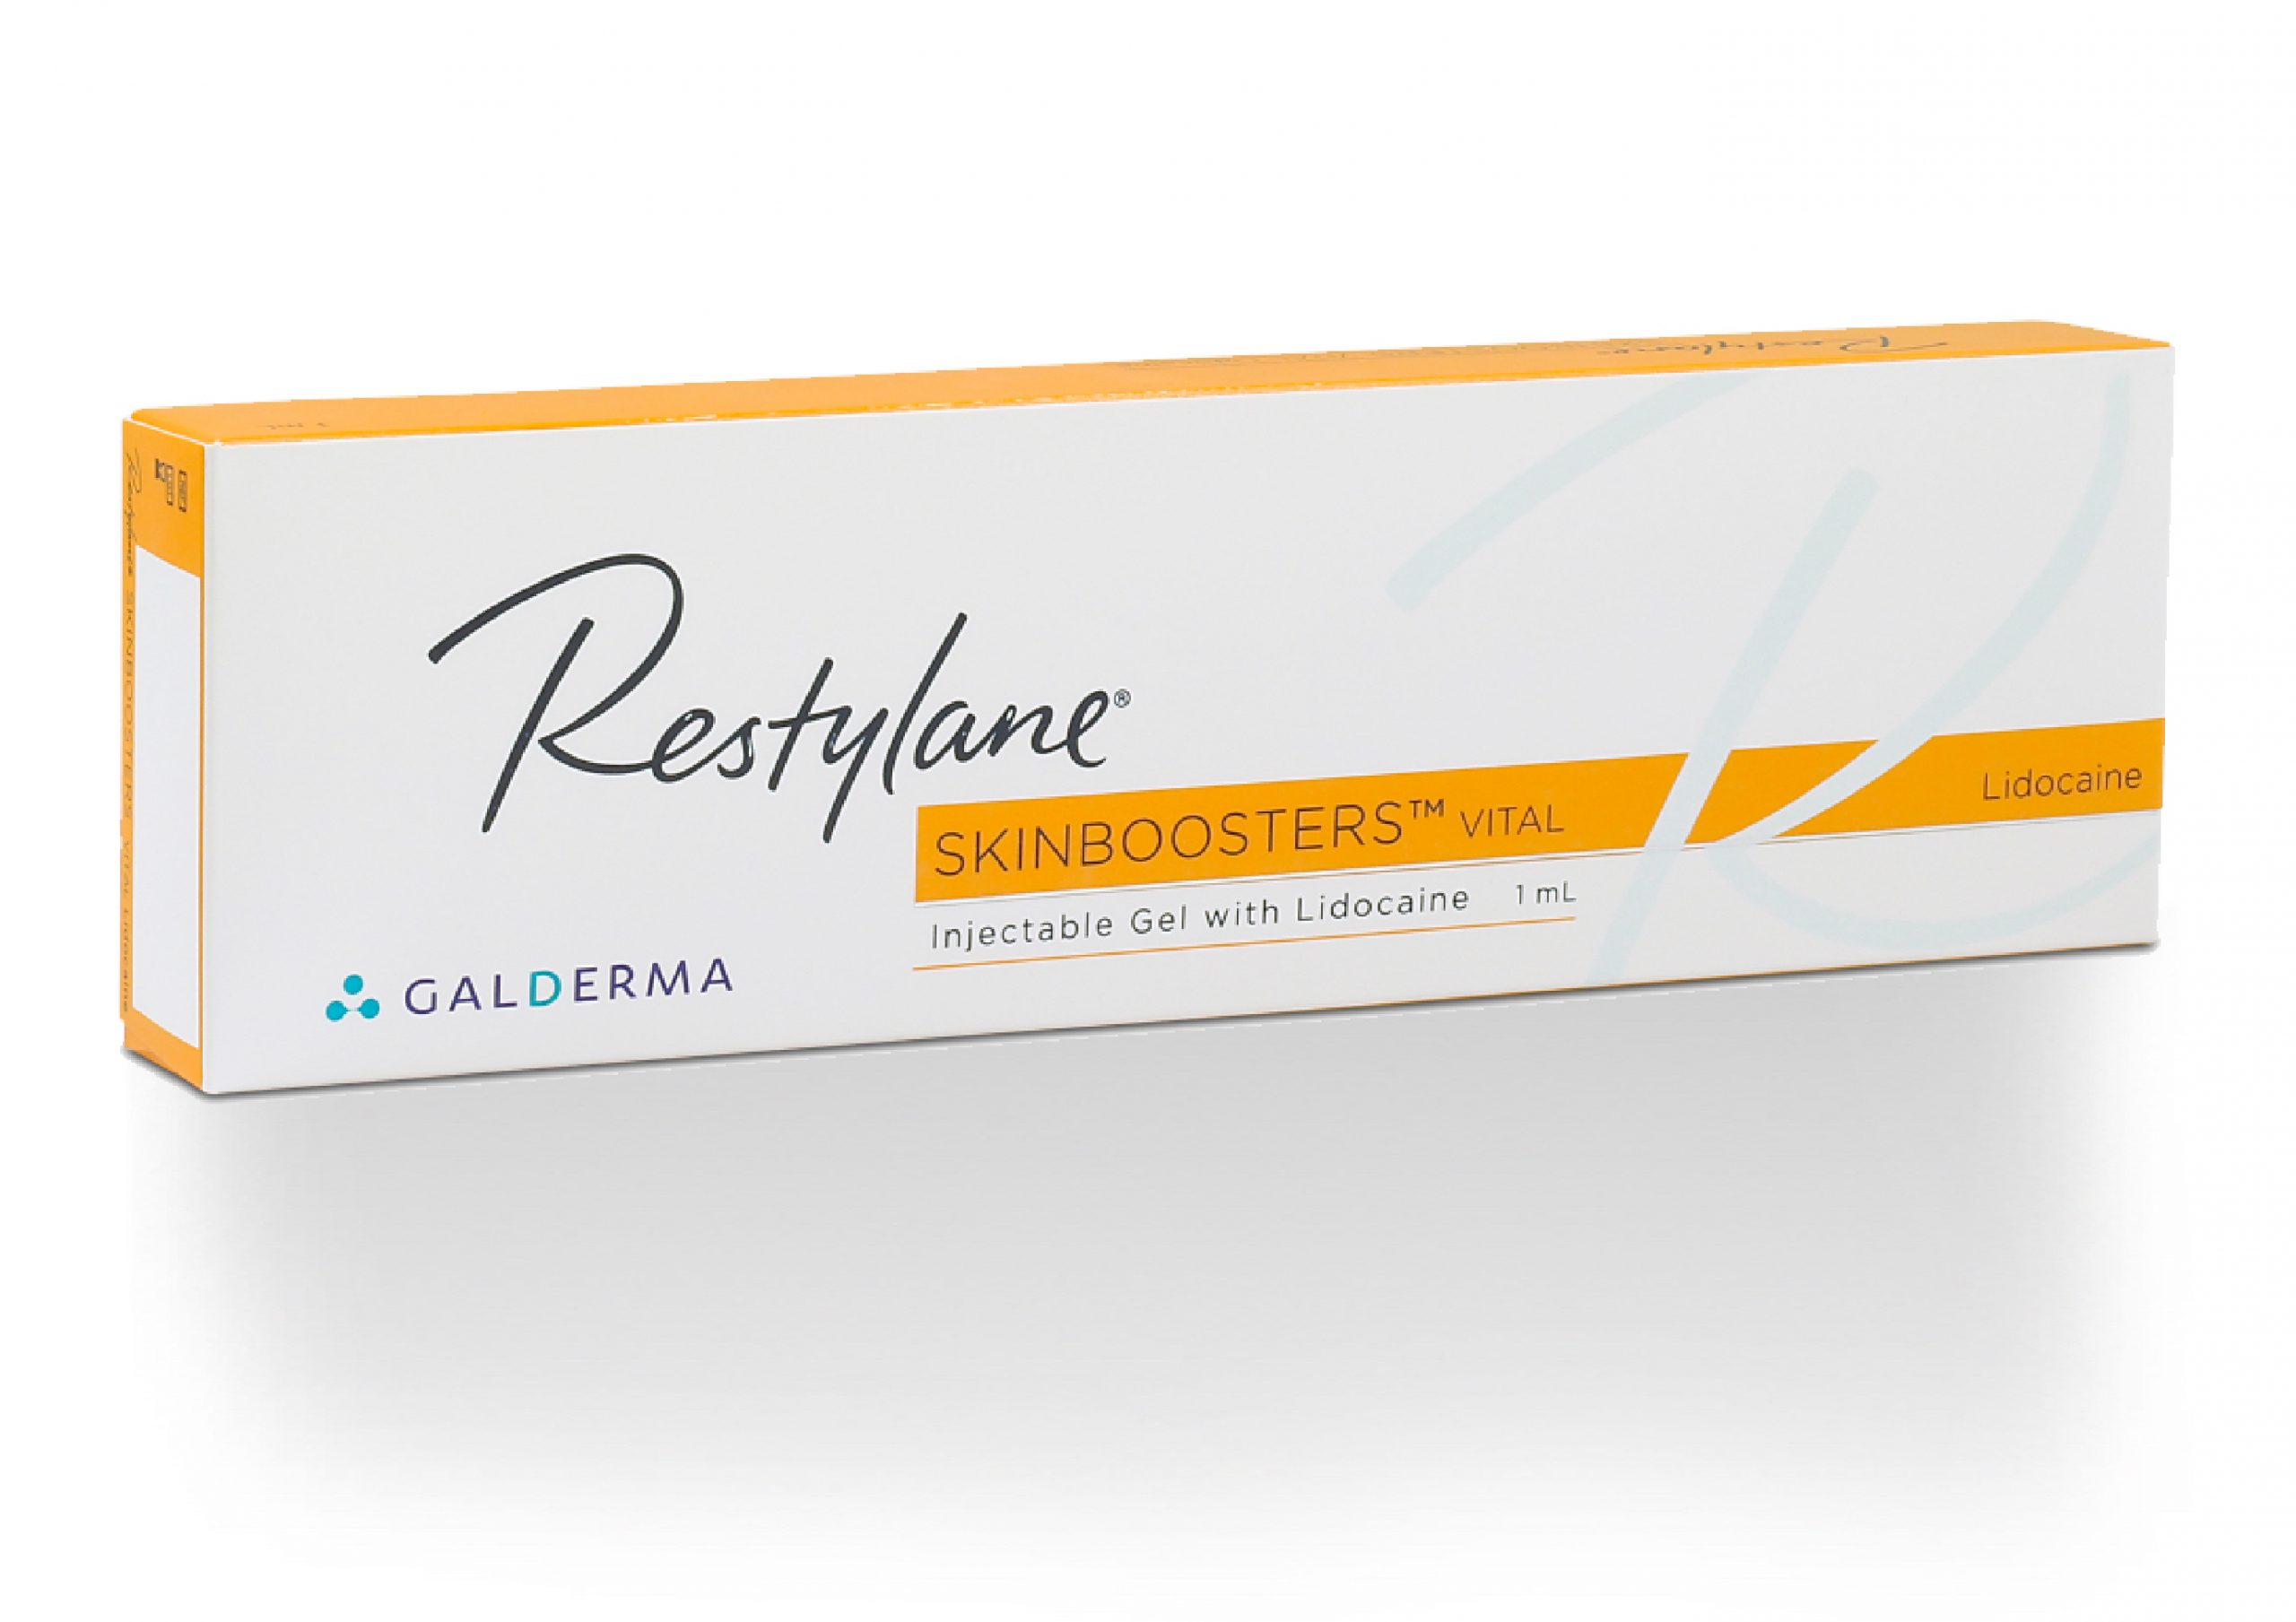 Restylane® Skinboosters™ - Product Image for restylane skinboosters